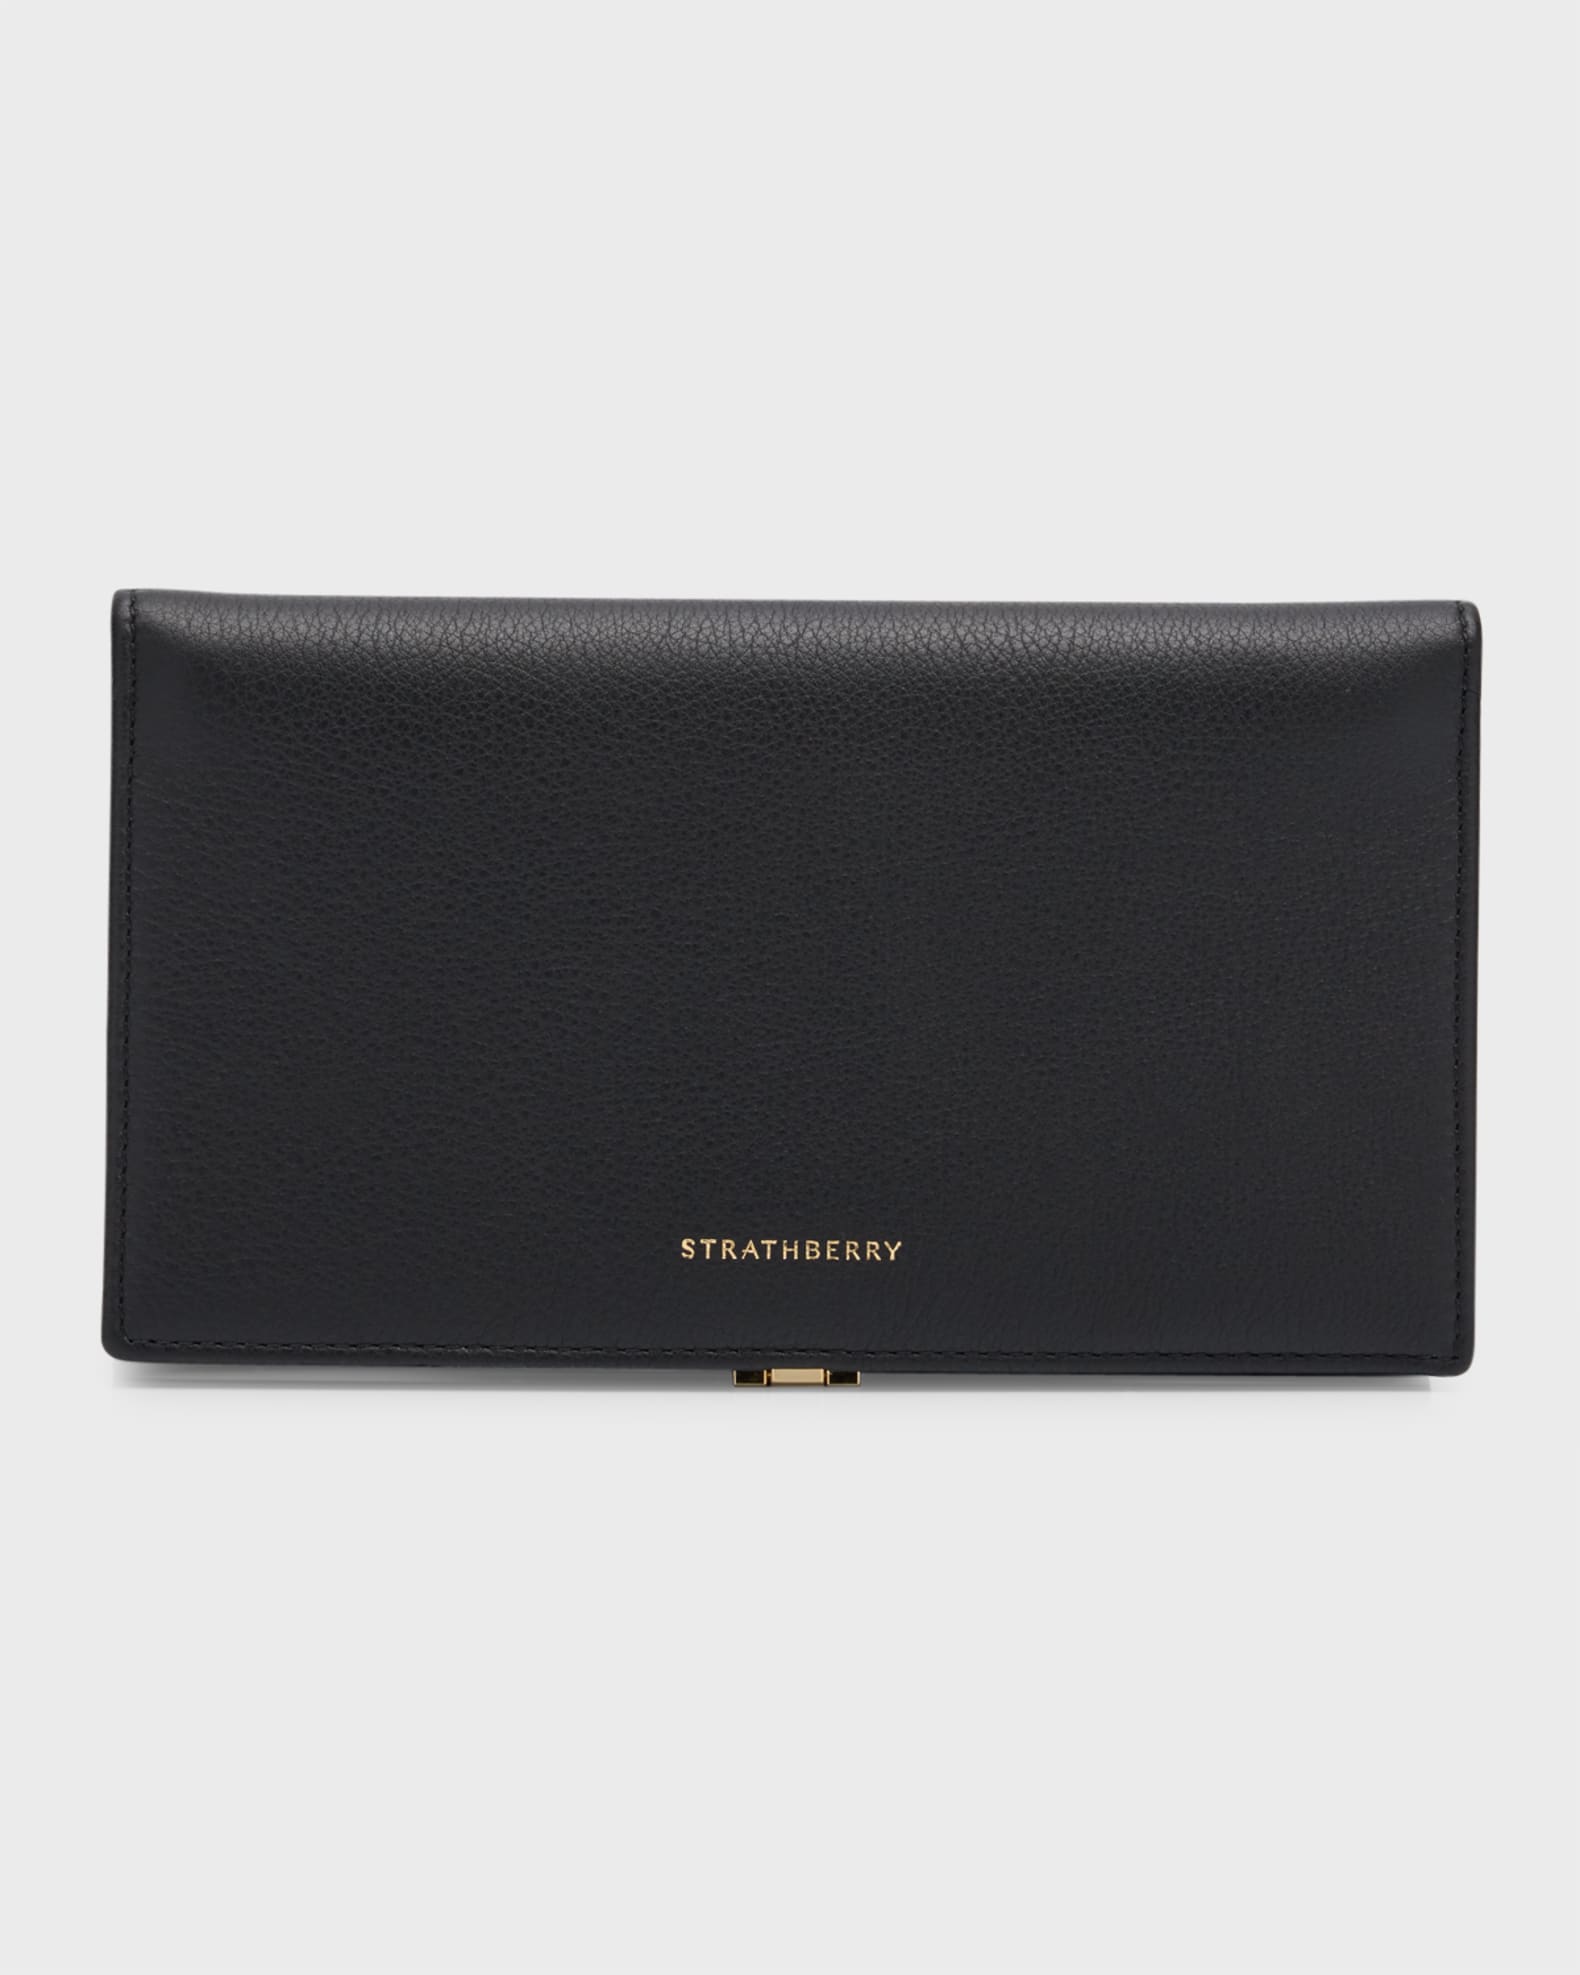 Strathberry Melville Street Large Bifold Wallet, Black Diamond, Women's, Small Leather Goods Wallets